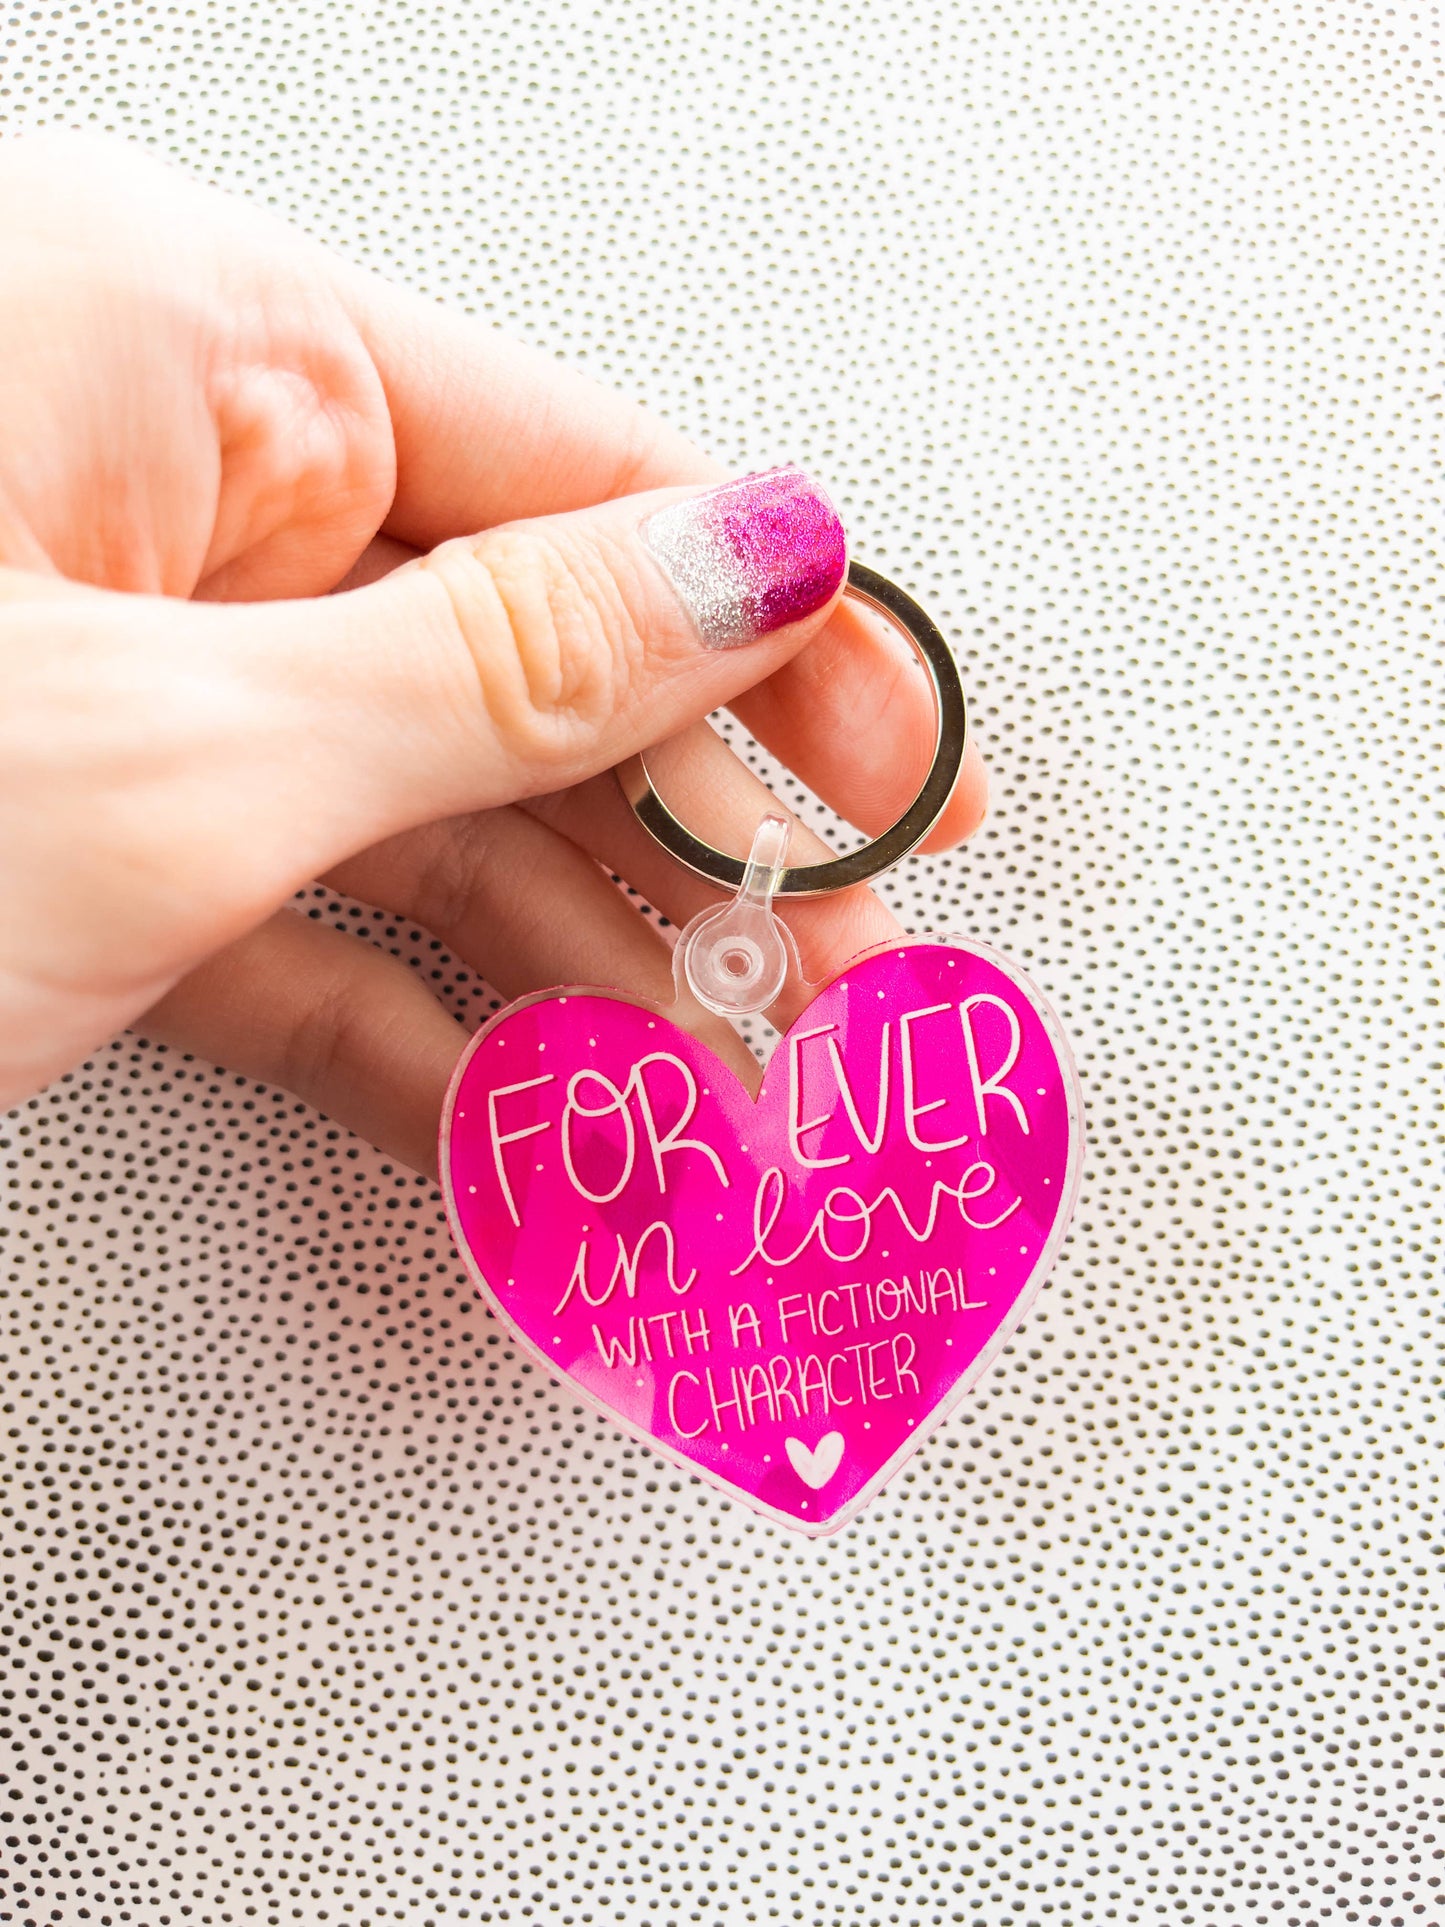 Forever in Love with a Fictional Character Acrylic Keychain by Emily Cromwell Designs